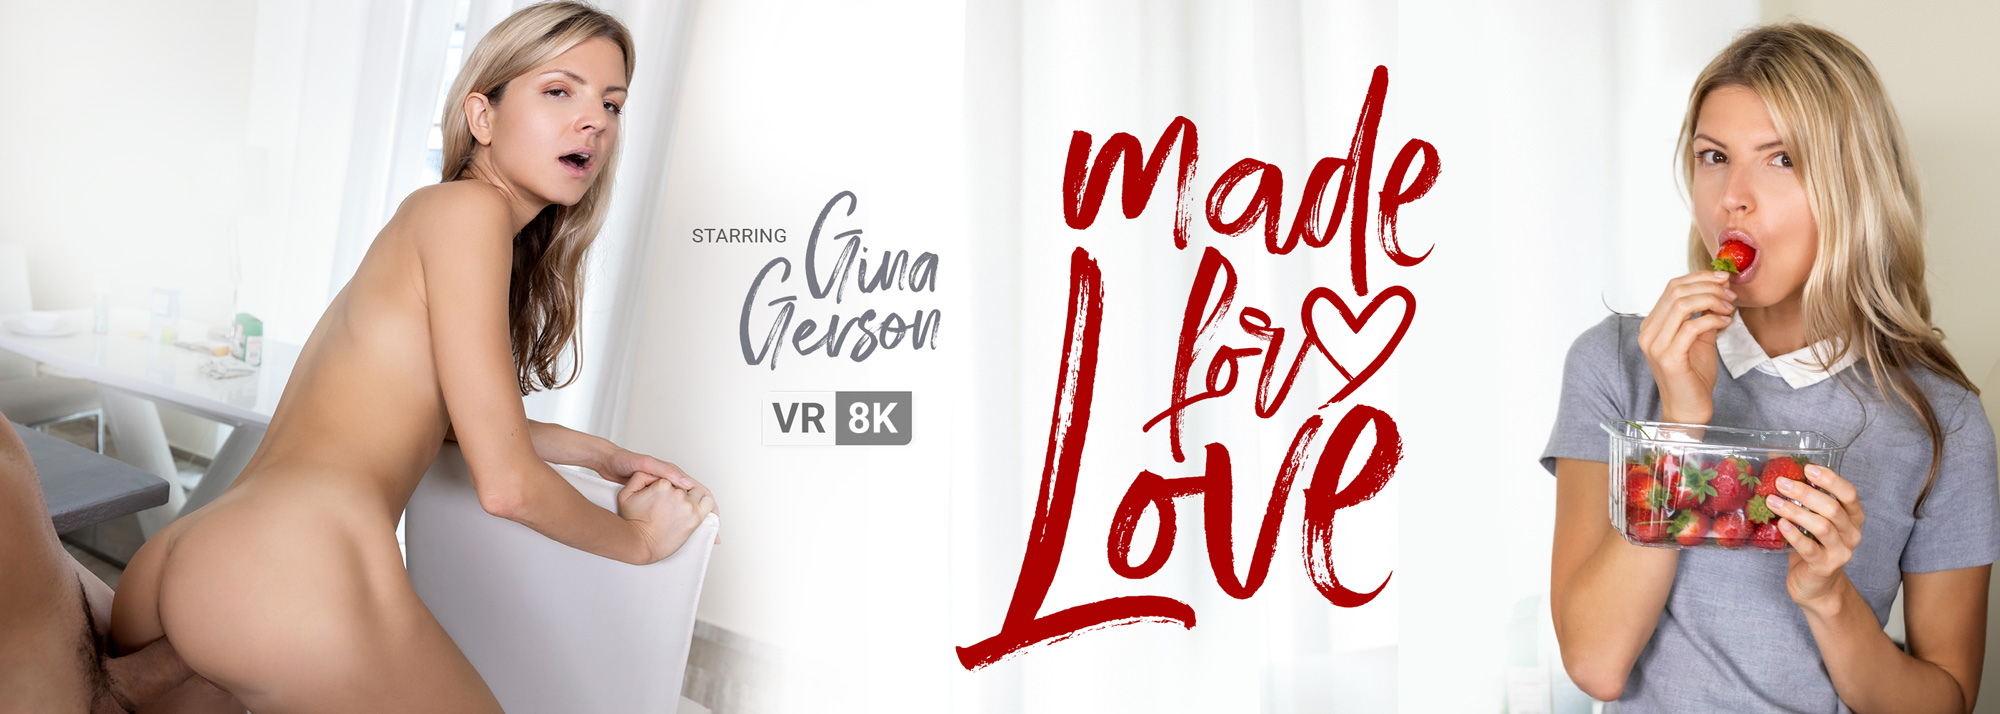 Made For Love with Gina Gerson  Slideshow